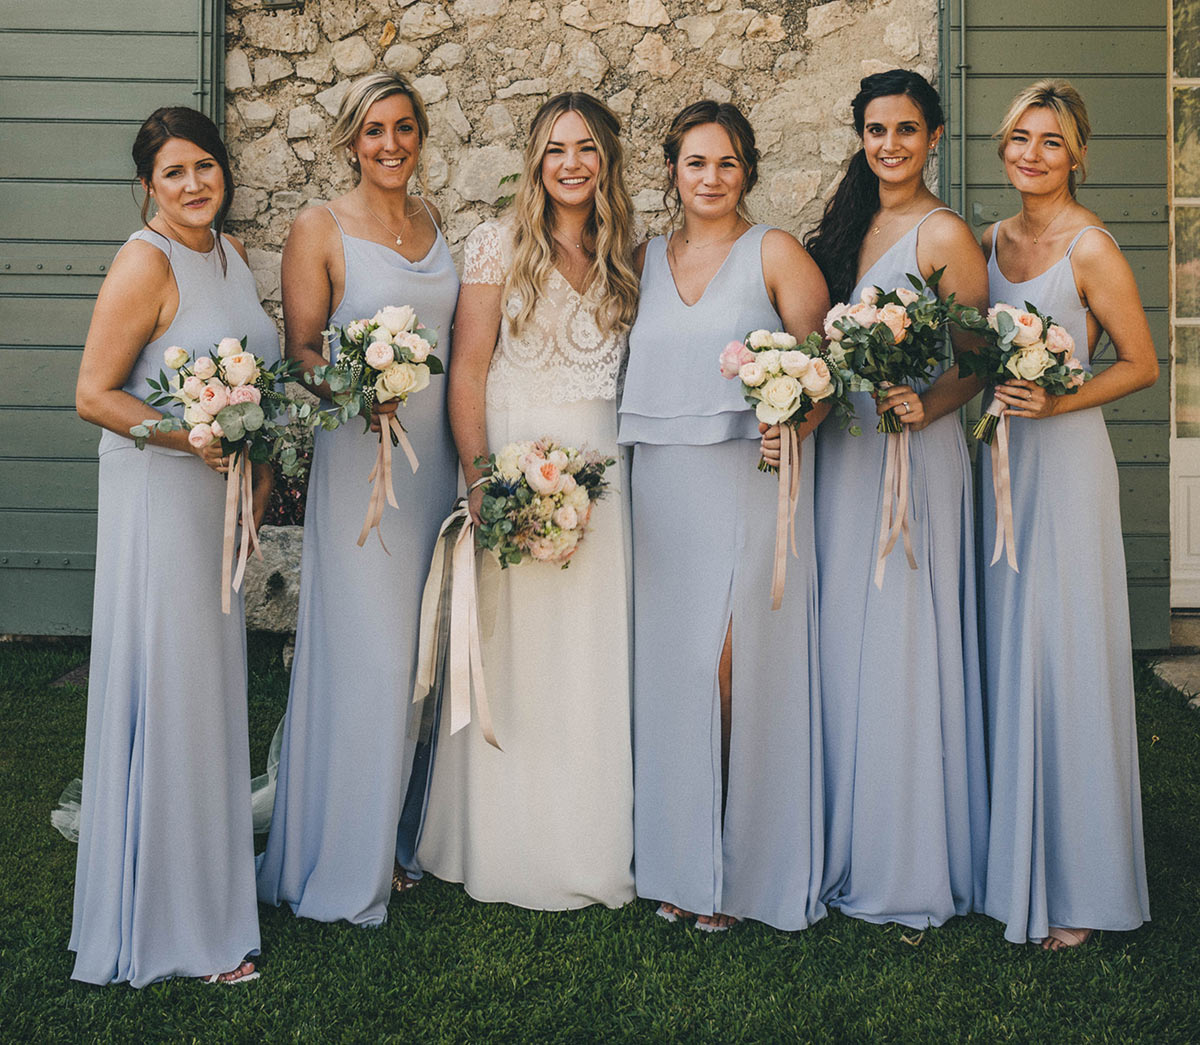 Maddie Chester with her bridemaids. Maddie's bridesmaid were designed and made by us in London to suit her wedding theme colour of light blue.